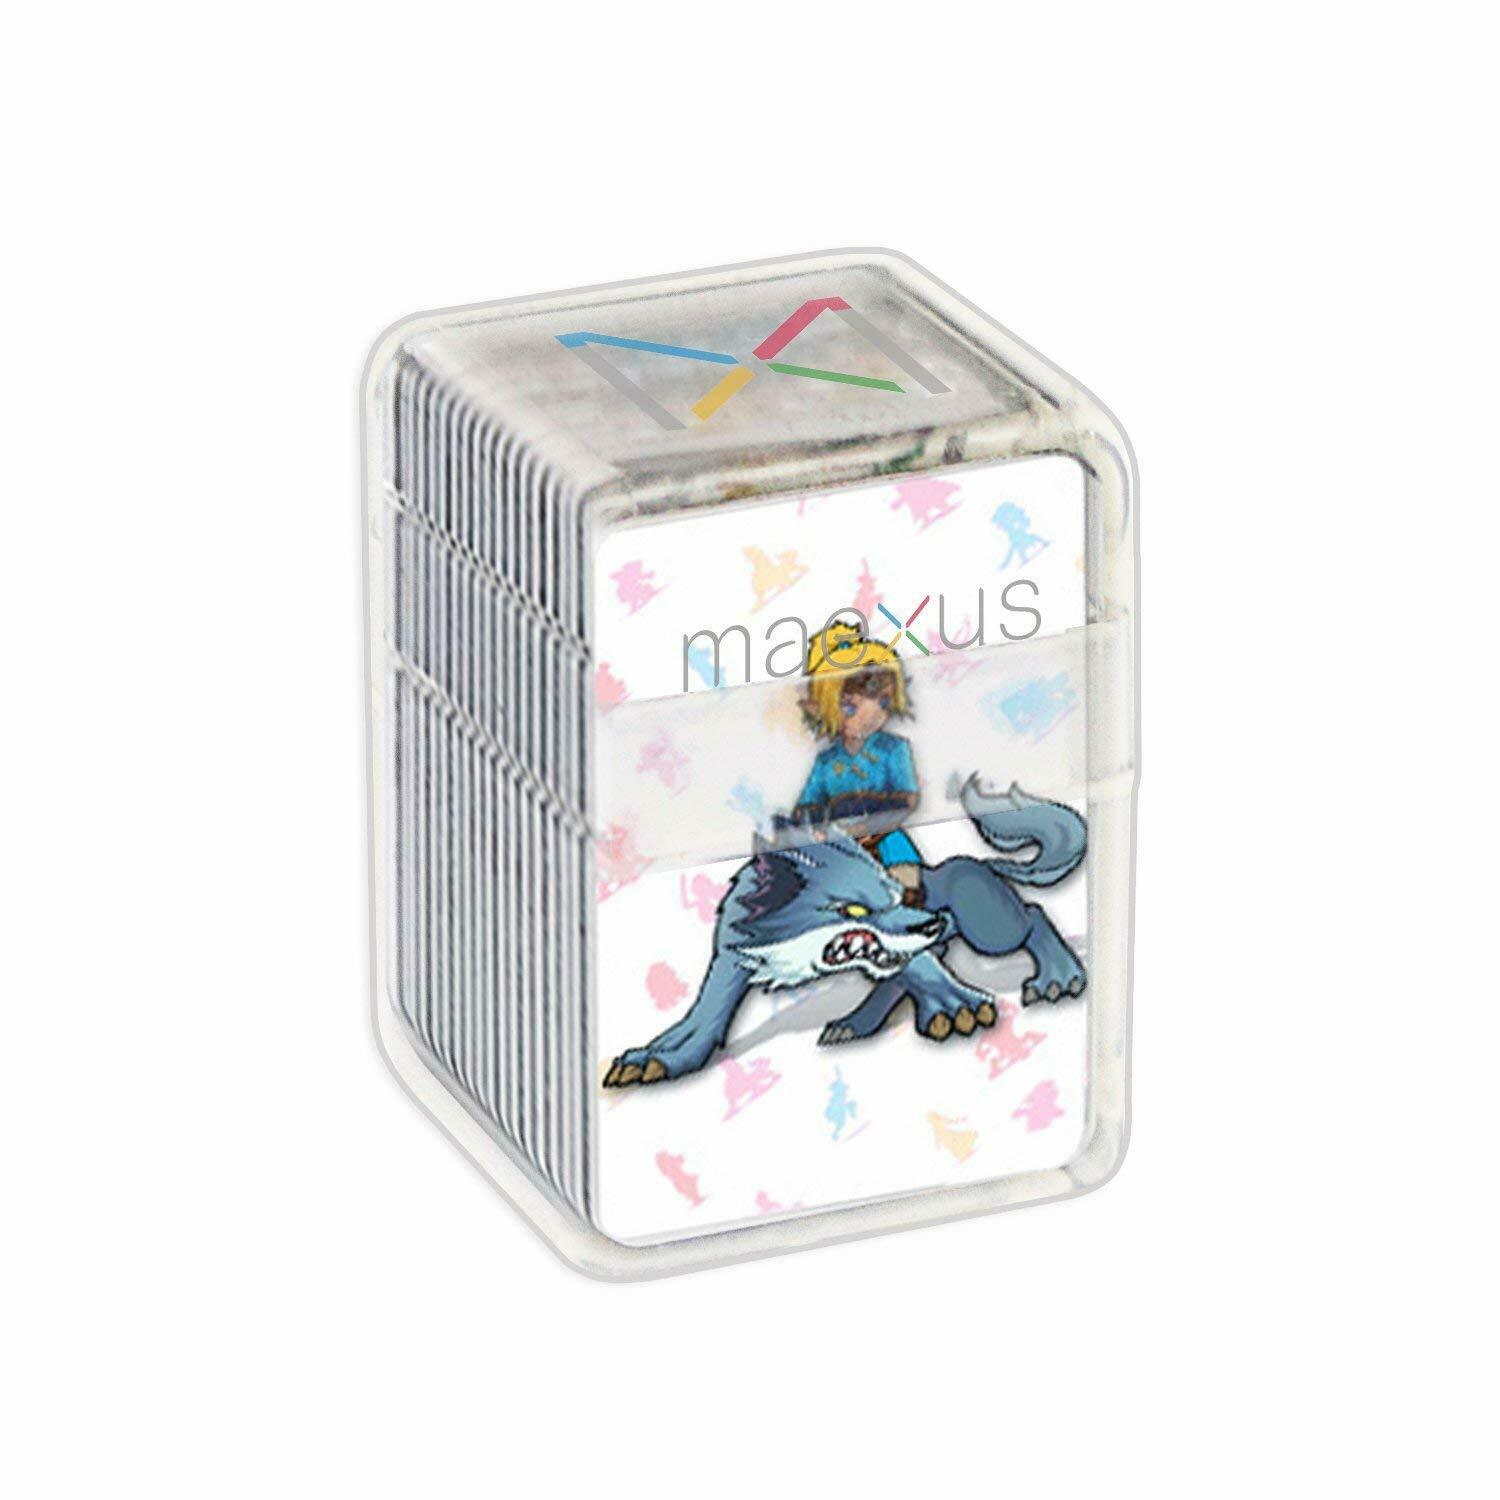 22 Full Set NFC PVC Tag Card ZELDA BREATH OF THE WILD WOLF LINK for Switch